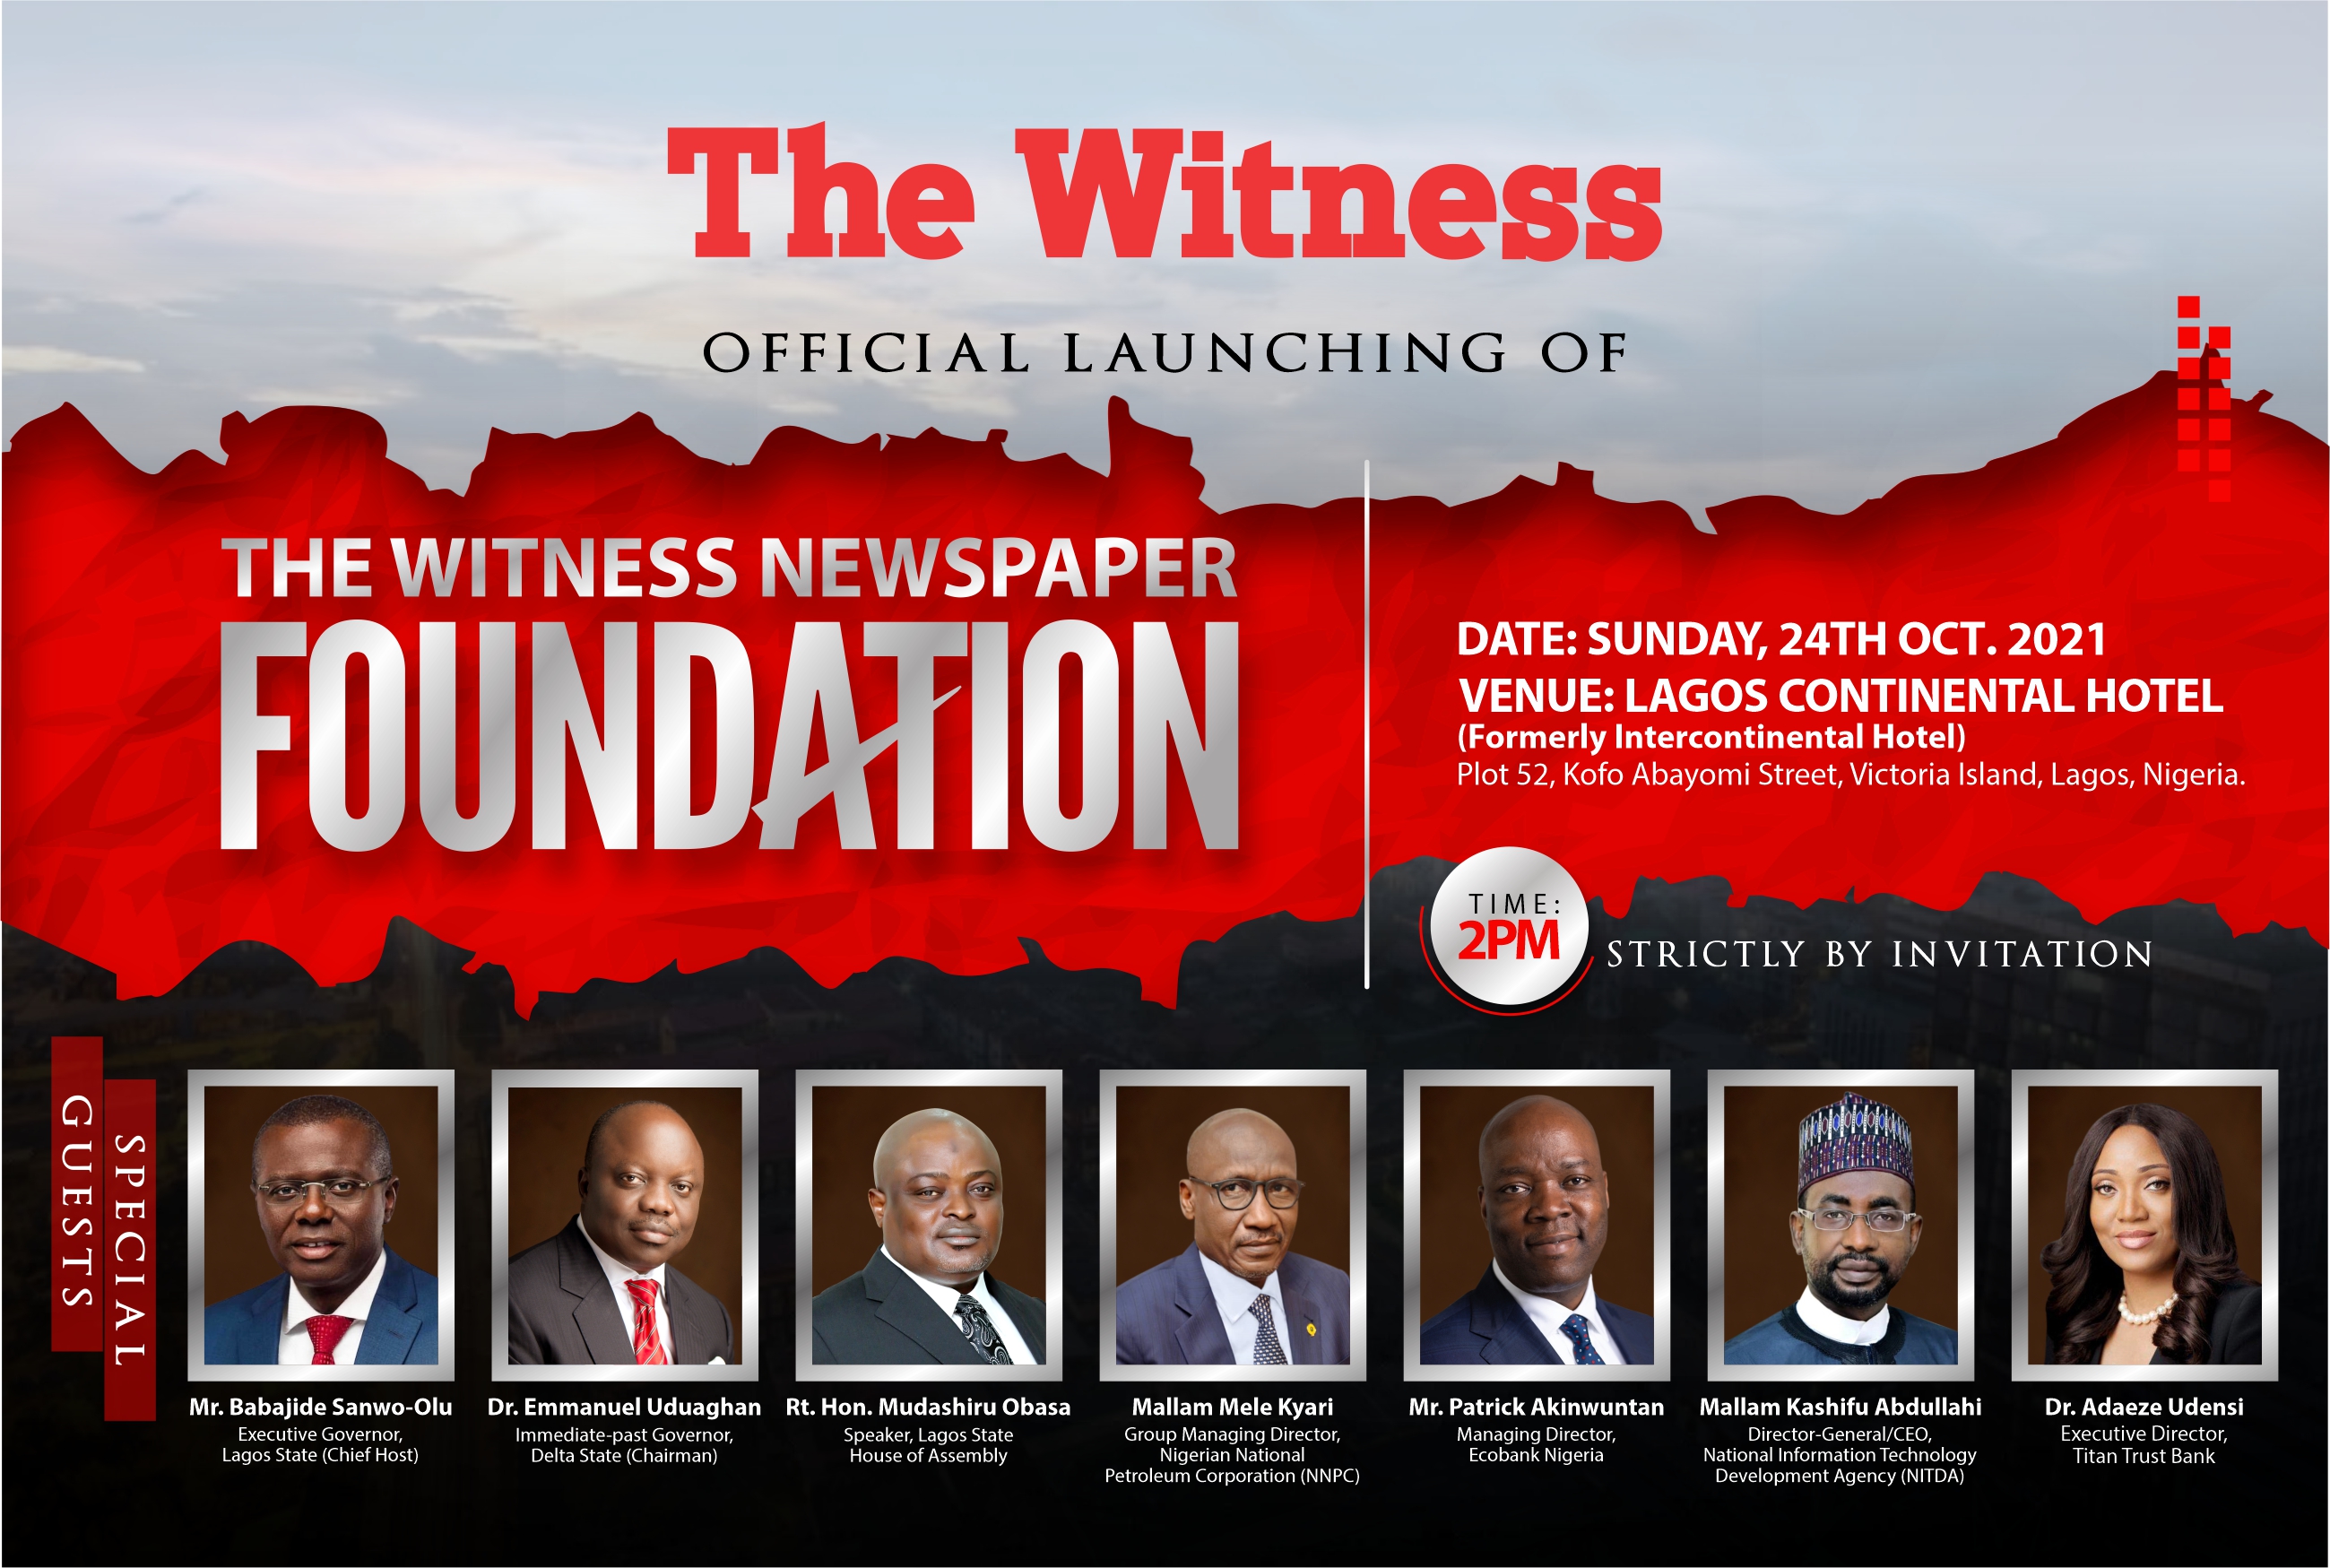 Sanwo-Olu, Uduaghan, others for The Witness Newspaper Foundation launch